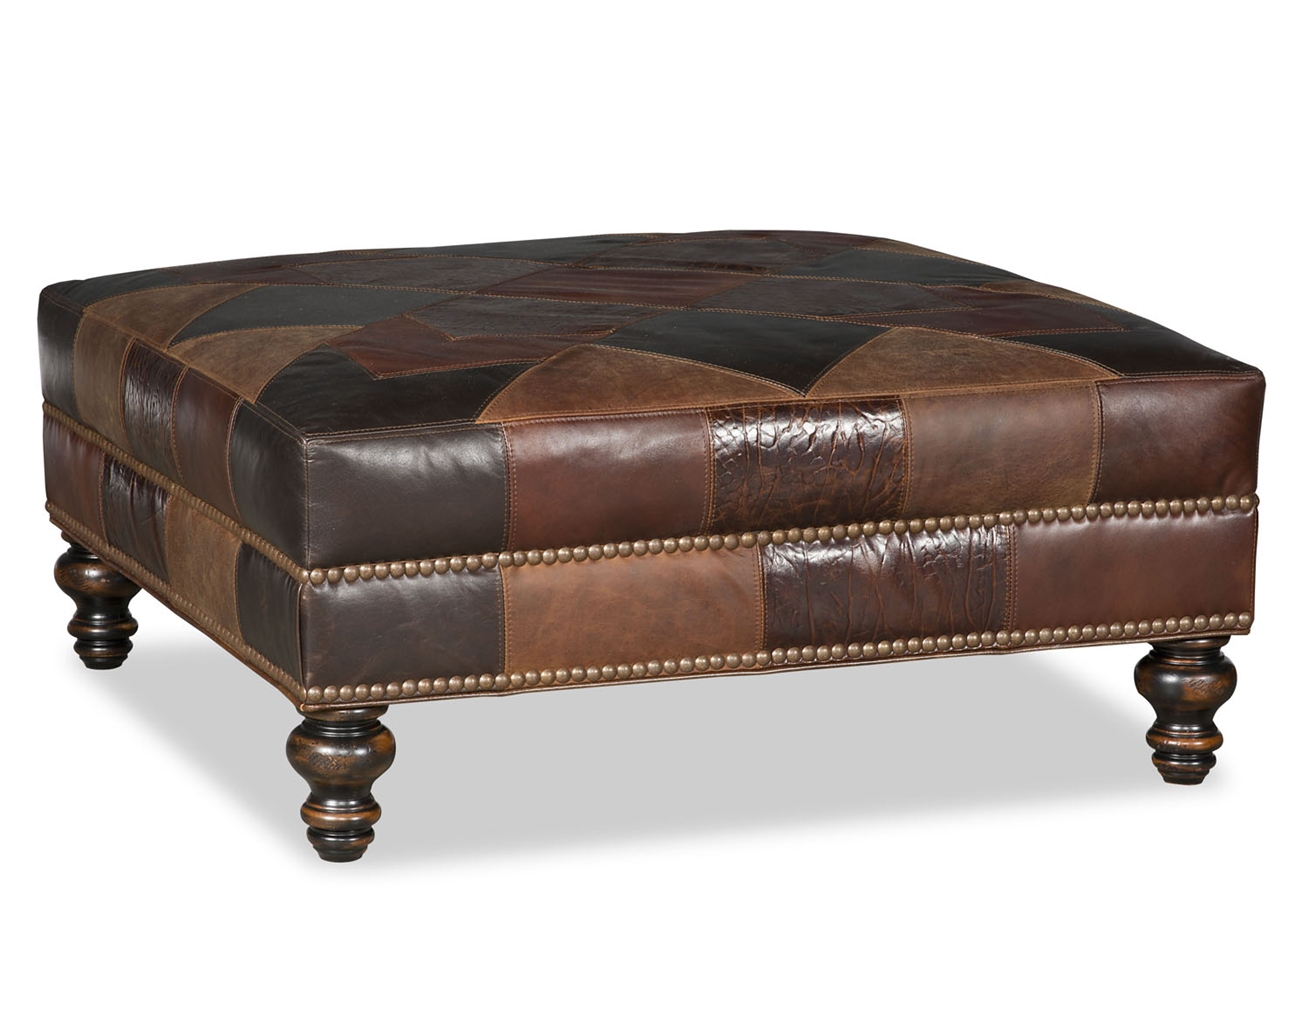 Luxury Leather & Upholstered Furniture Checkered Small Ottoman Bench